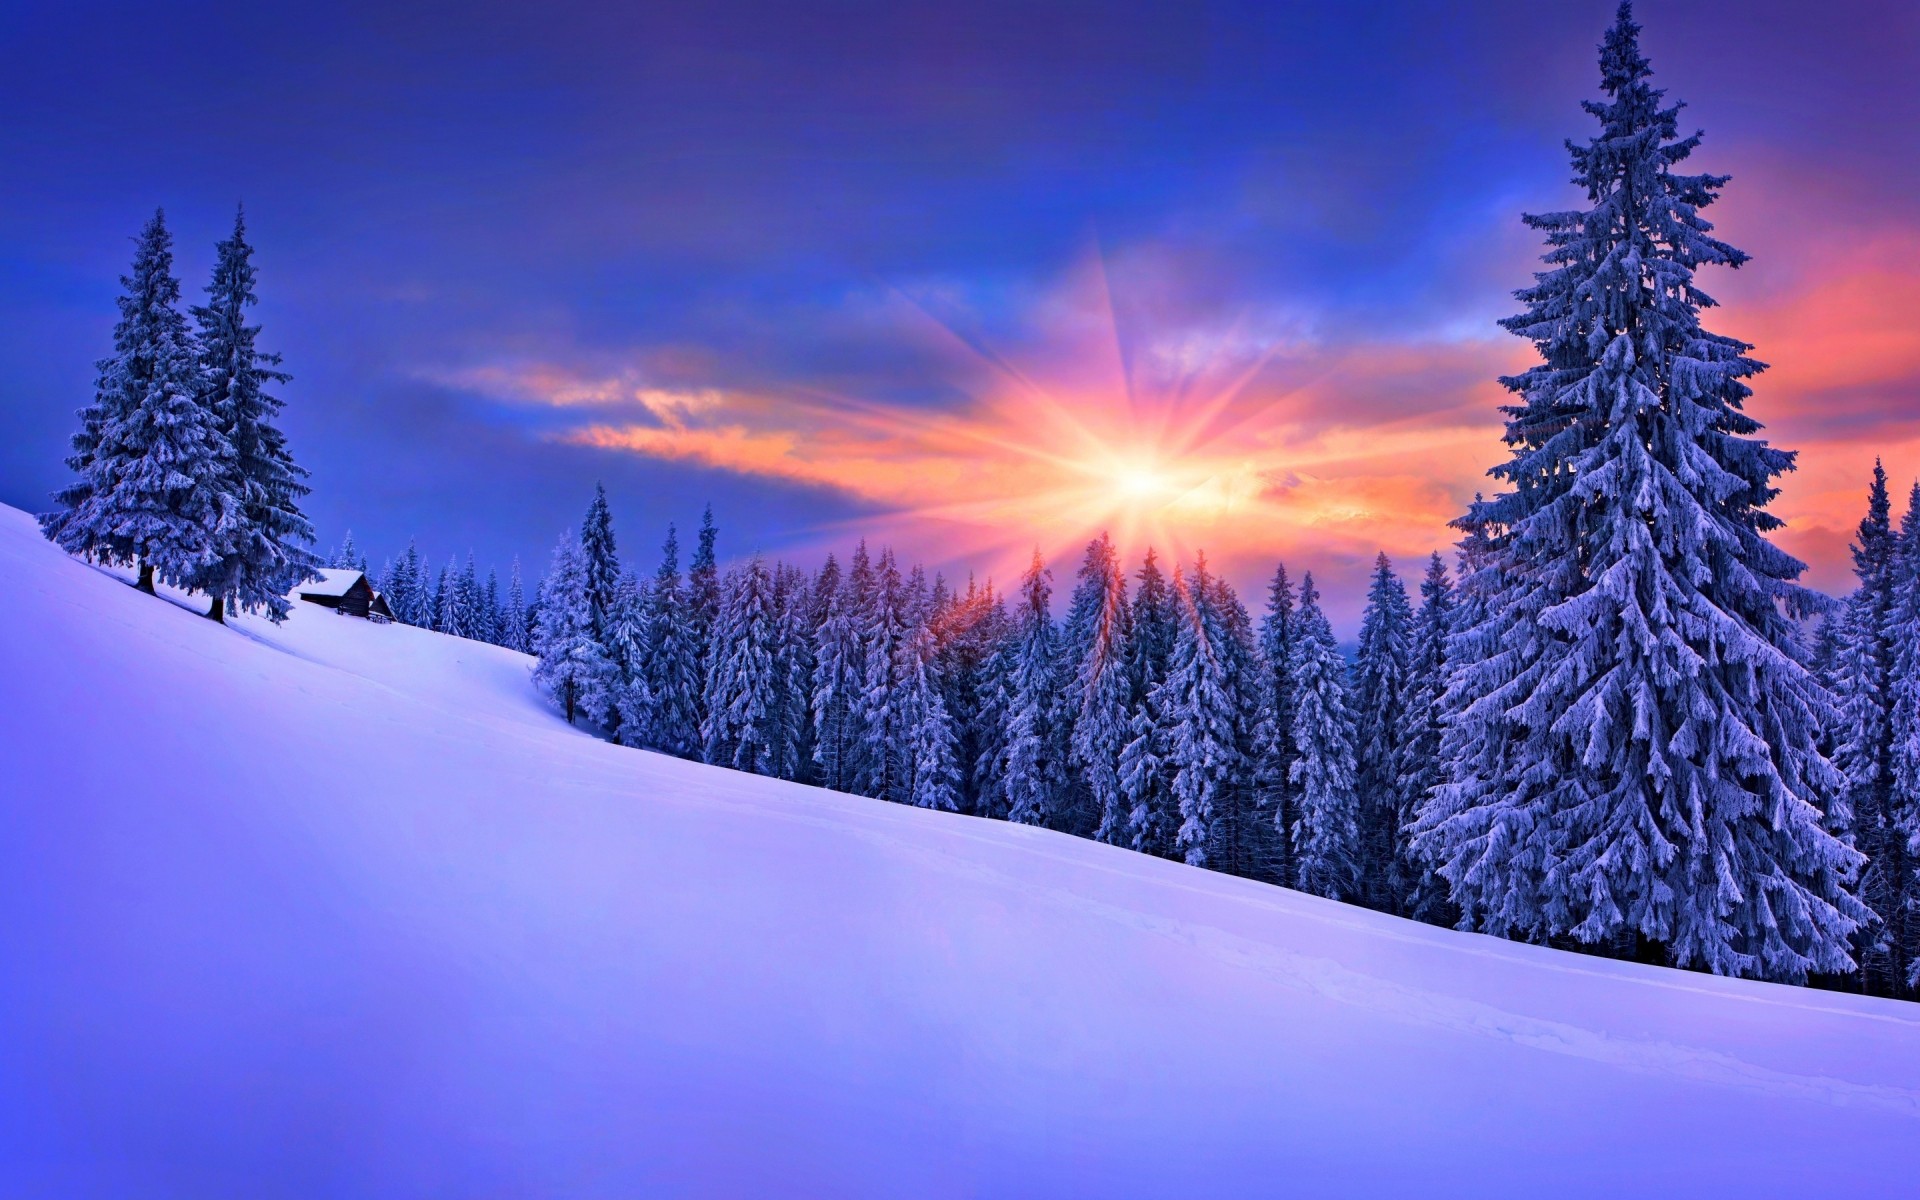 Late Winter Sunset - Android wallpapers